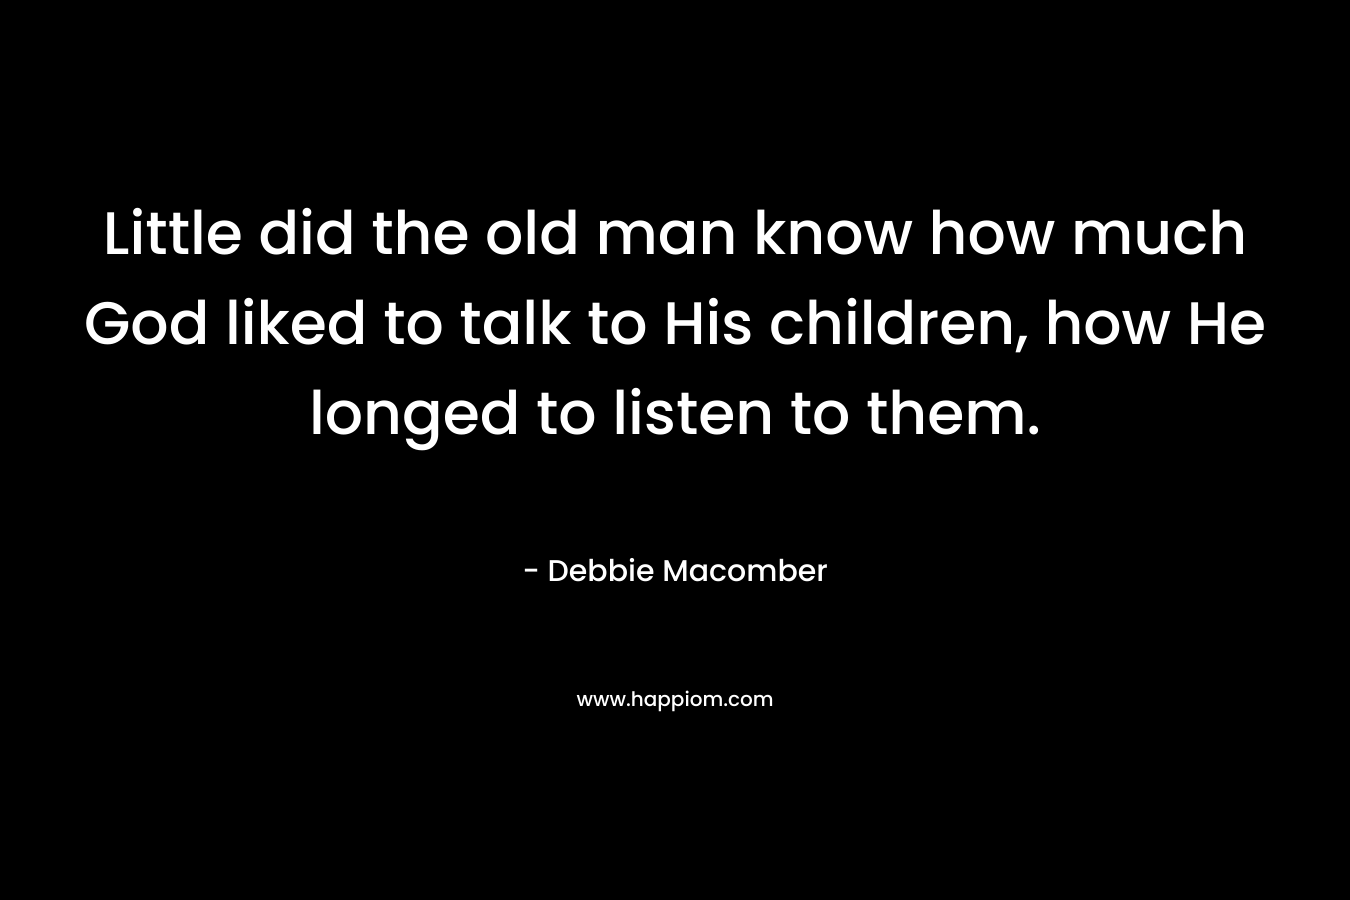 Little did the old man know how much God liked to talk to His children, how He longed to listen to them. – Debbie Macomber